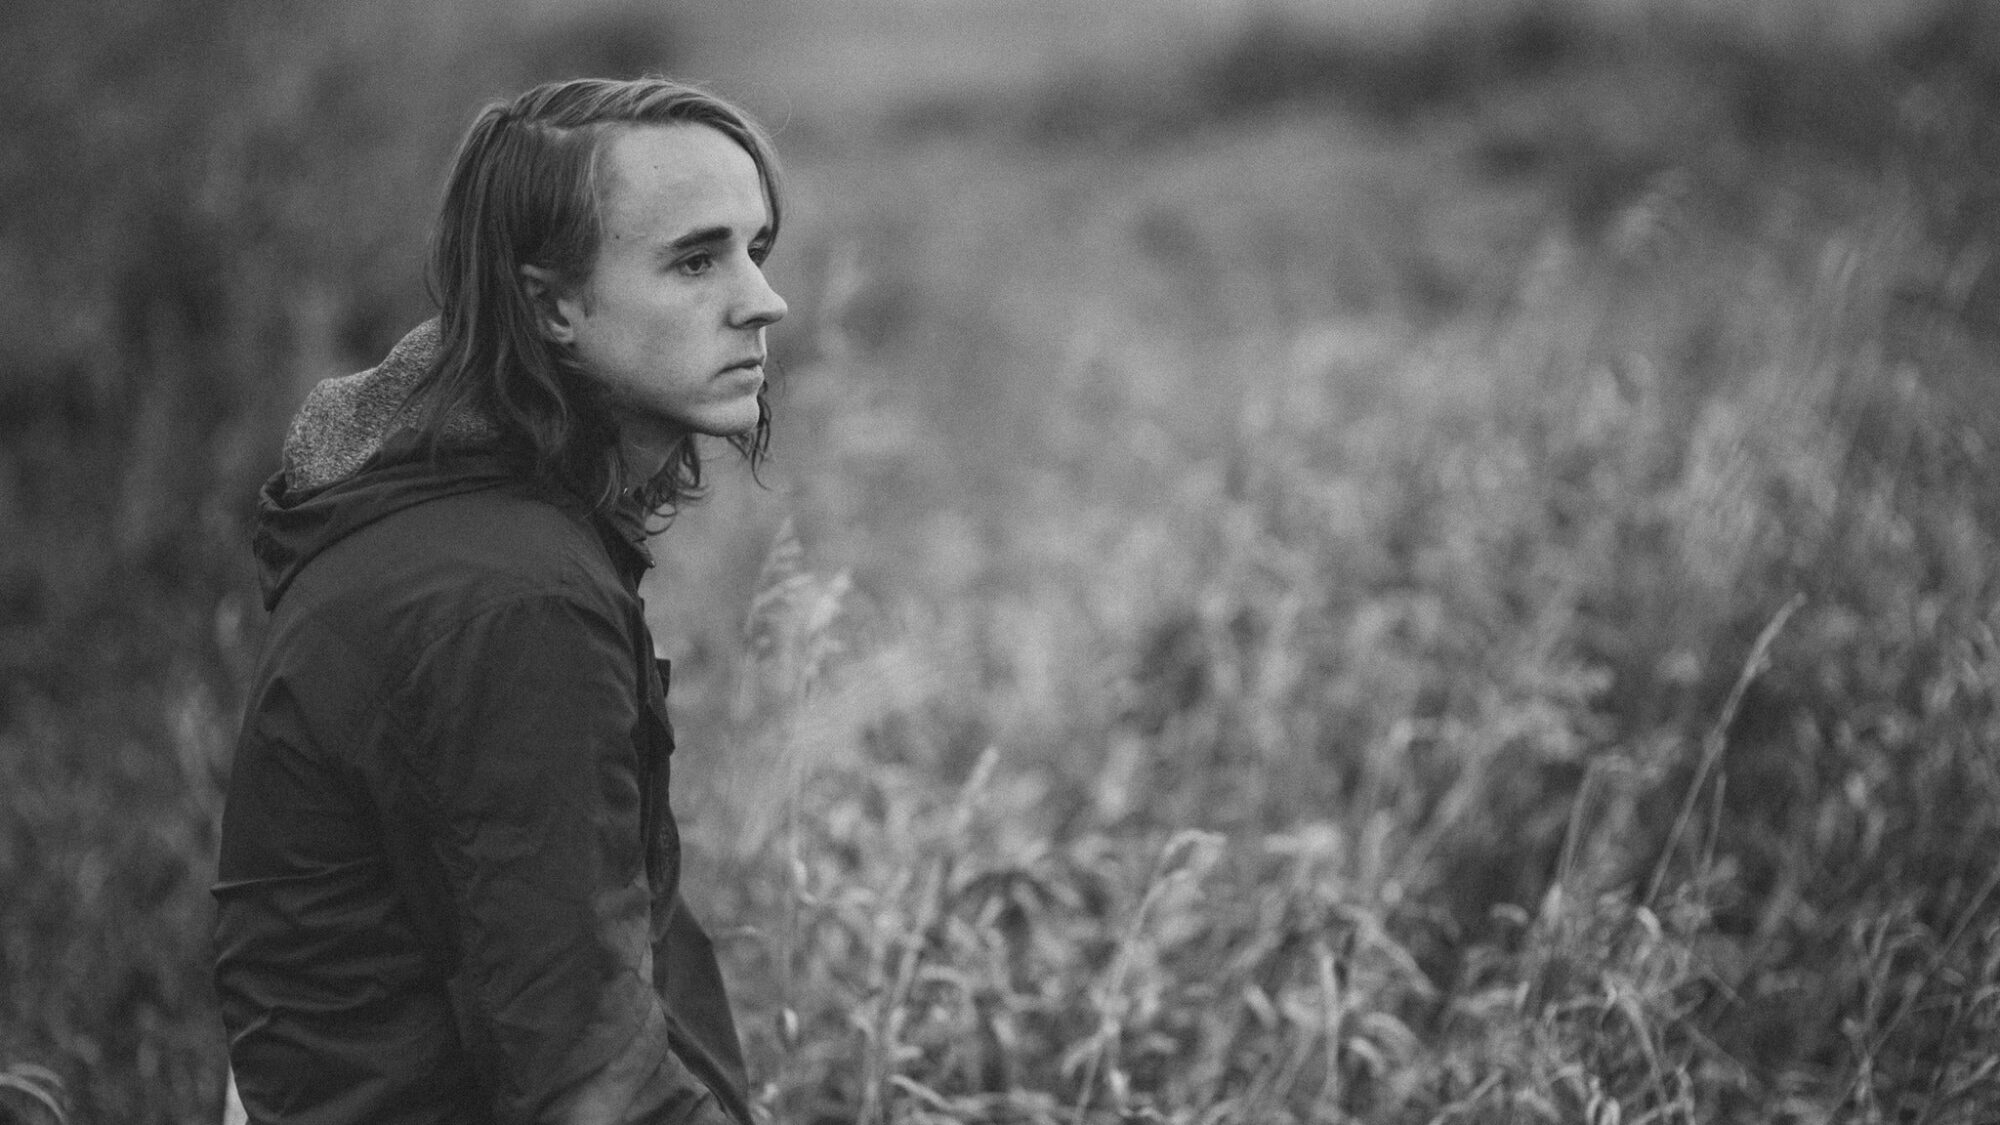 Image name Andy Shauf at Brudenell Social Club Leeds the 33 image from the post Andy Shauf at Brudenell Social Club, Leeds in Yorkshire.com.